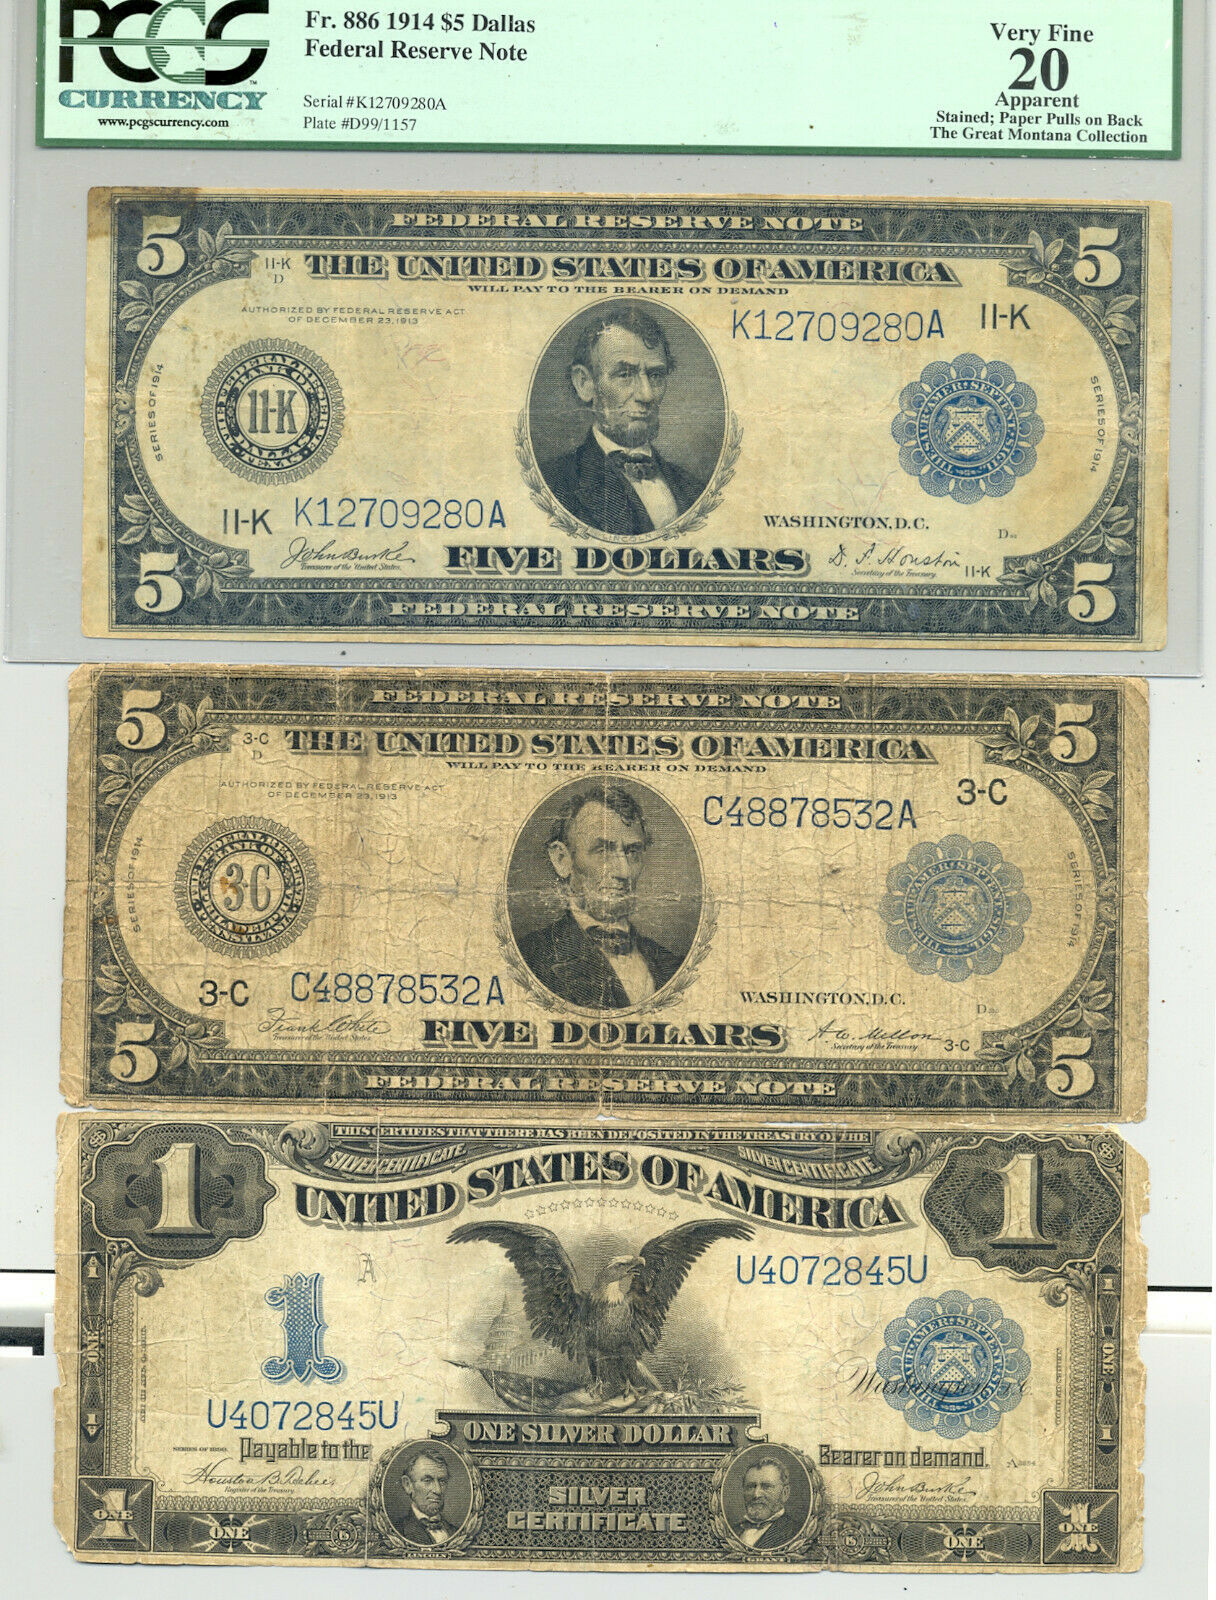 $5 Series 1914 Federal Reserve Notes And $1 1899 Black Eagle Silver Certificate